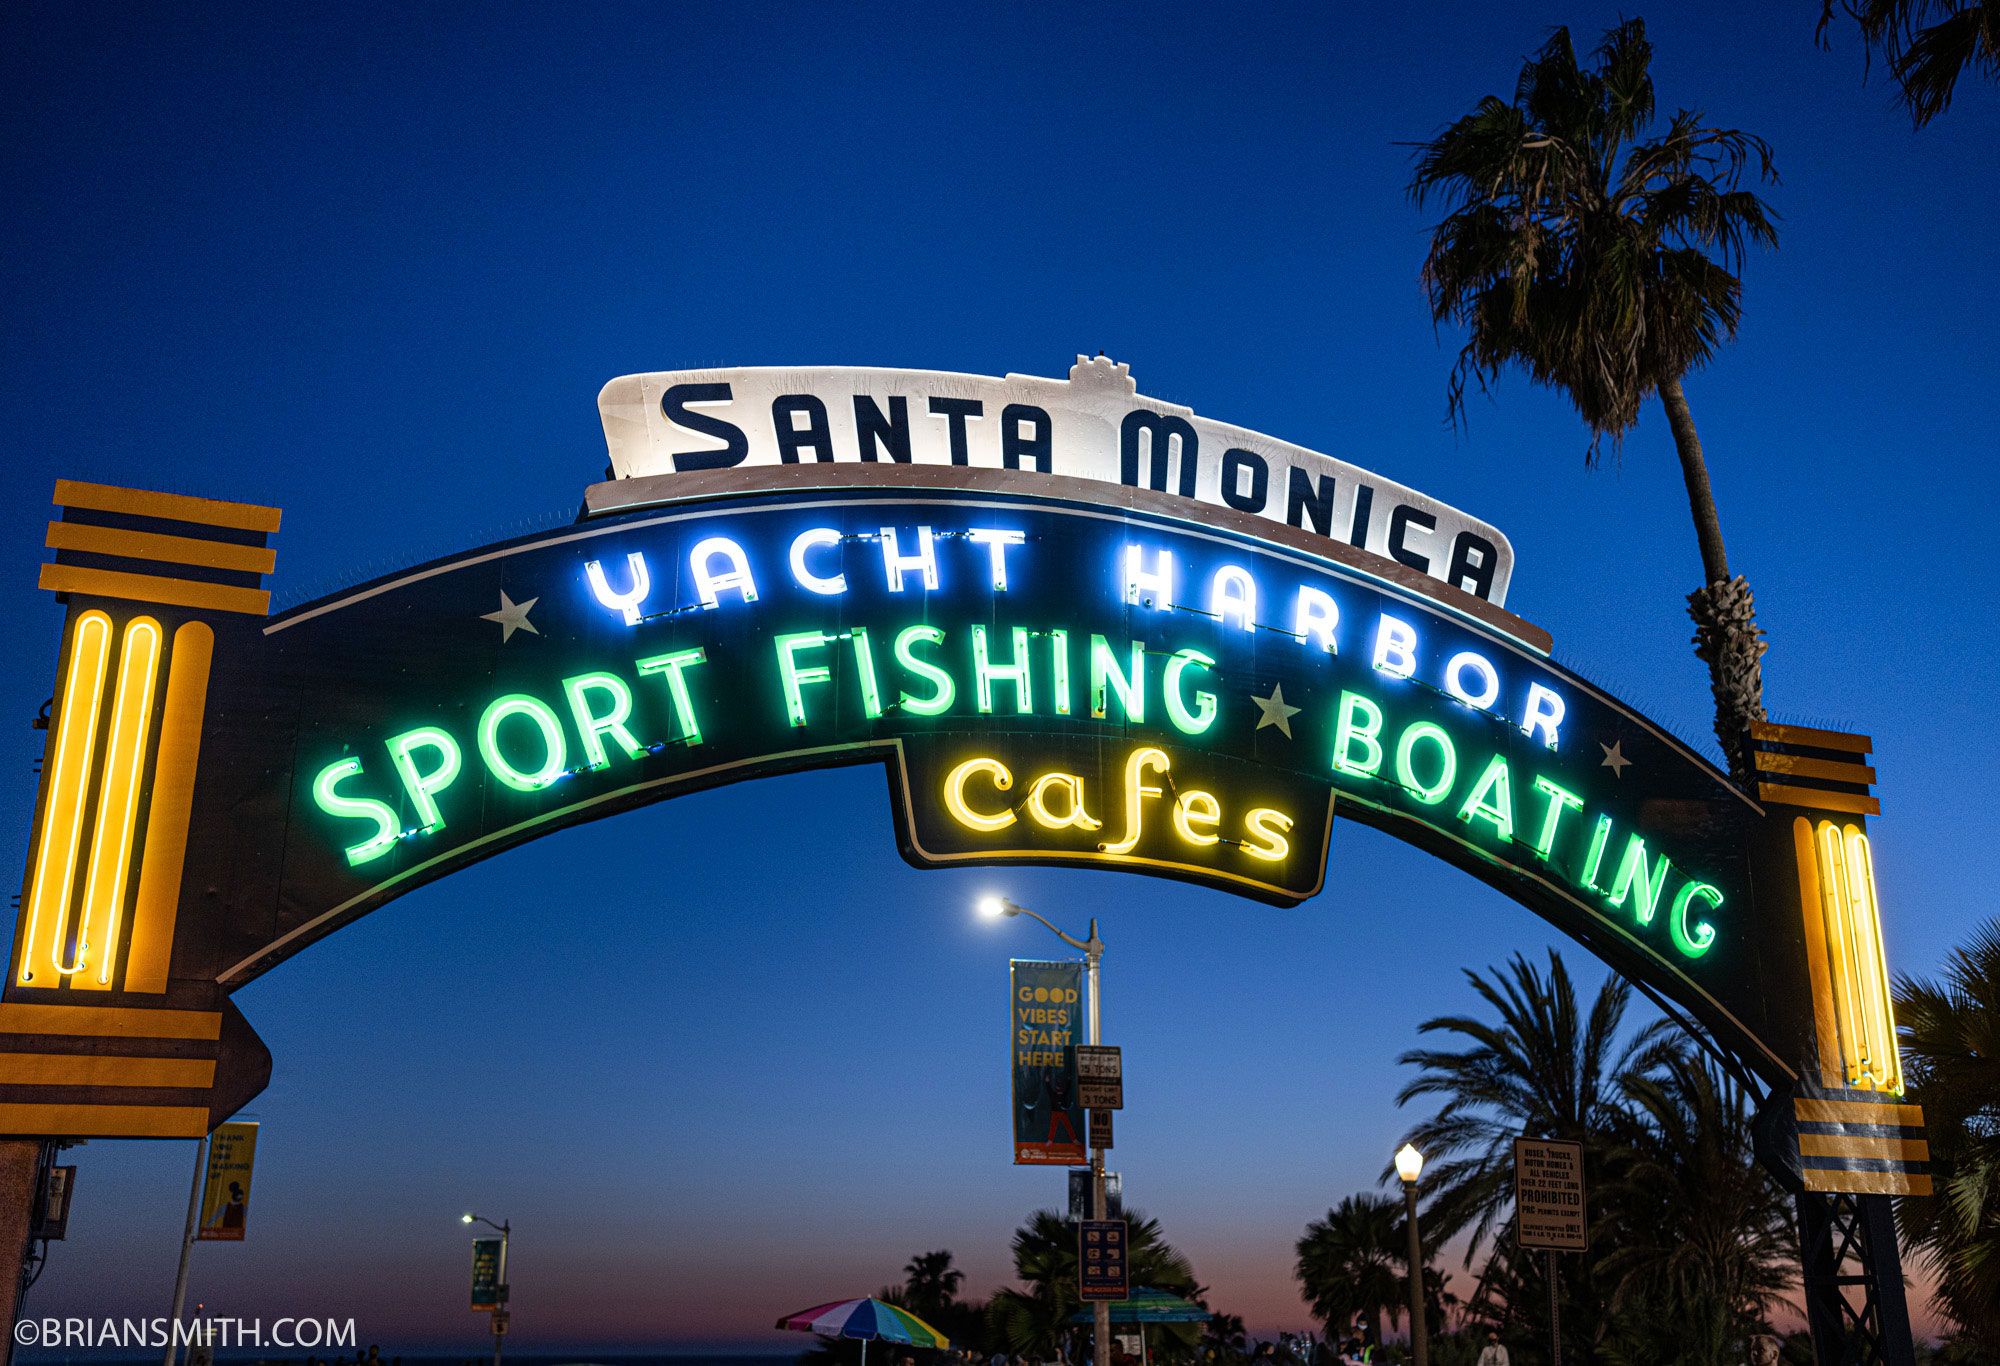 Santa Monica Pier at dusk photographed with Sony Alpha 1 and FE 35mm F1.4 GM lens